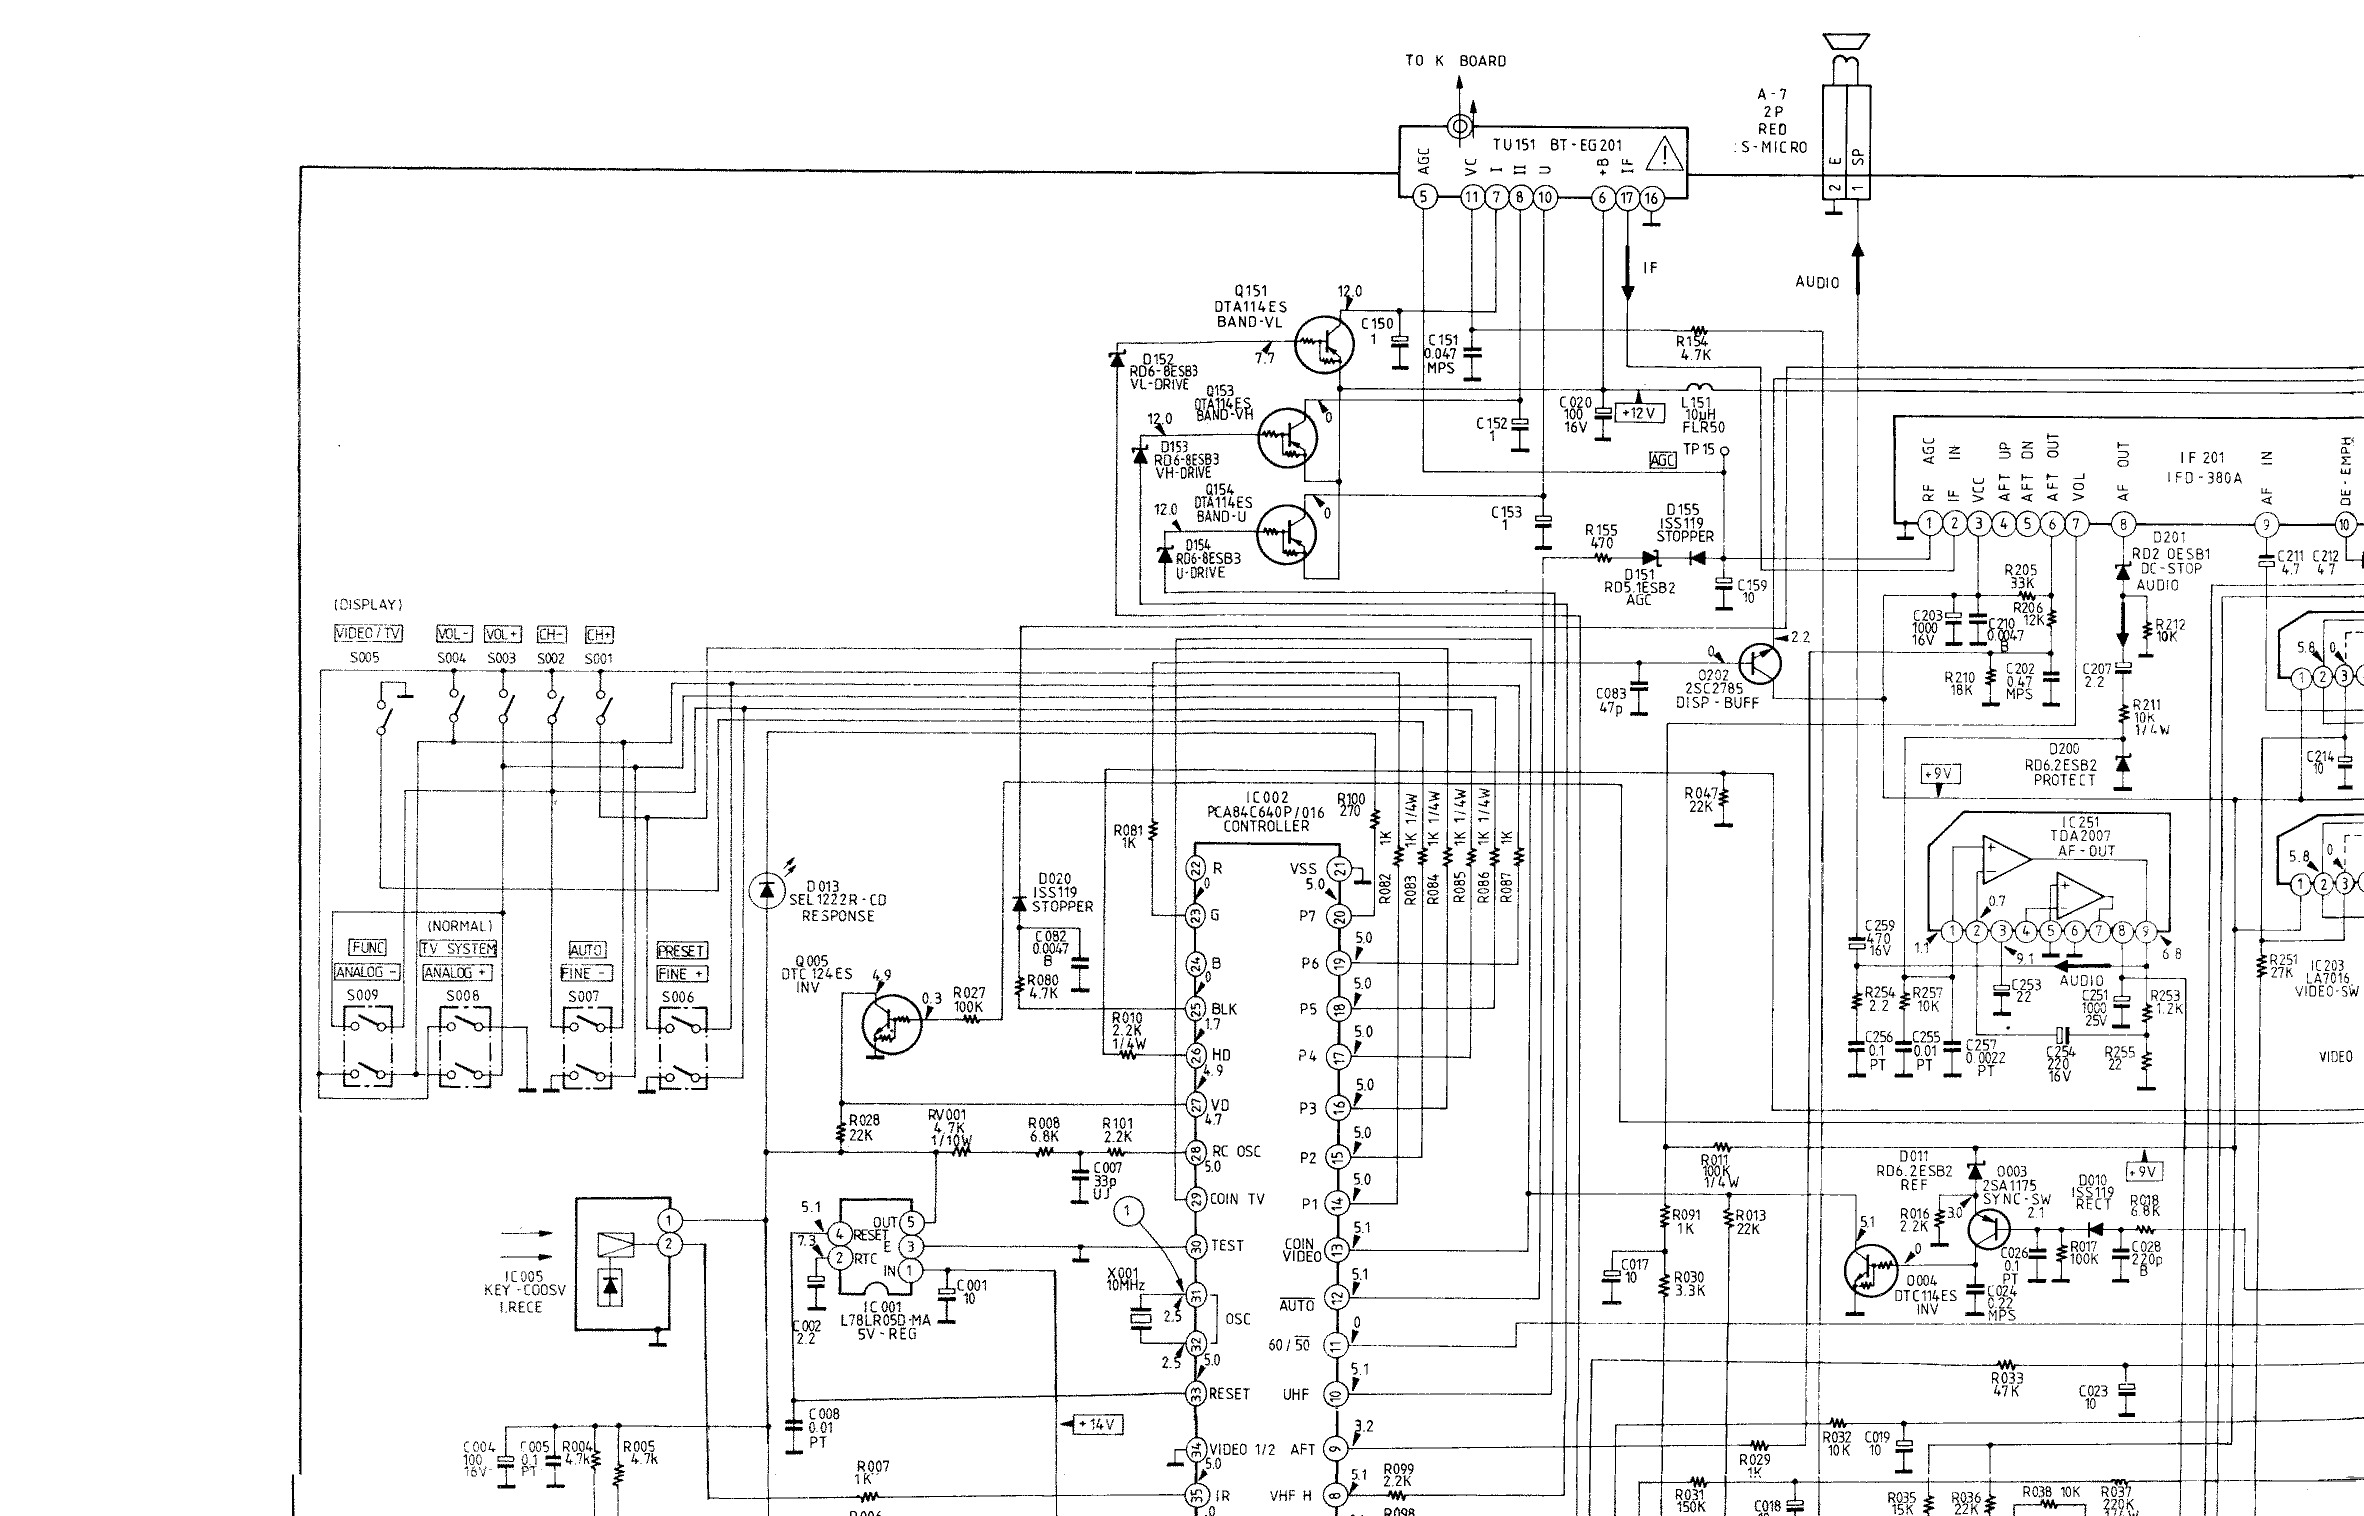 Sony Kv 1435 Diagram Pdf - Sony Kv 1435 Sch Service Manual Download Schematics Eeprom Repair Info For Electronics Experts - Complete owner's manual for sony kv1435 in a pdf file.